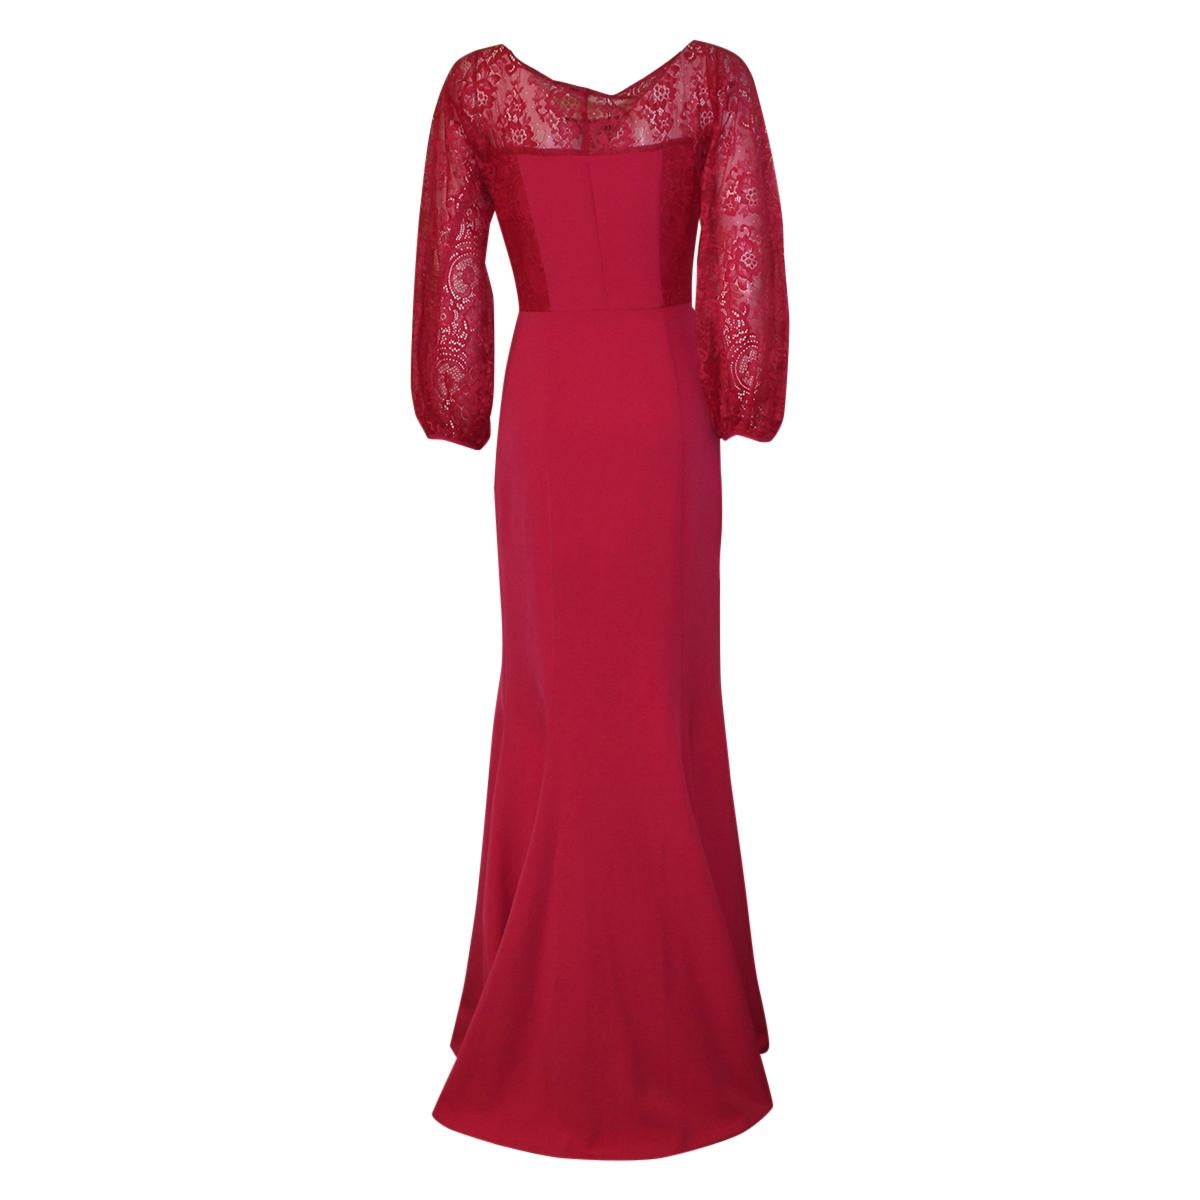 Beautiful Blumarine long dress
Long dress
Cotton (64%) Polyamid
Fuxia color
lace insert on sleeves and top
Long sleeves
Length (shoulder/hem) cm 157 (61.81 inches)
Original price € 1200
Worldwide express shipping included in the price !